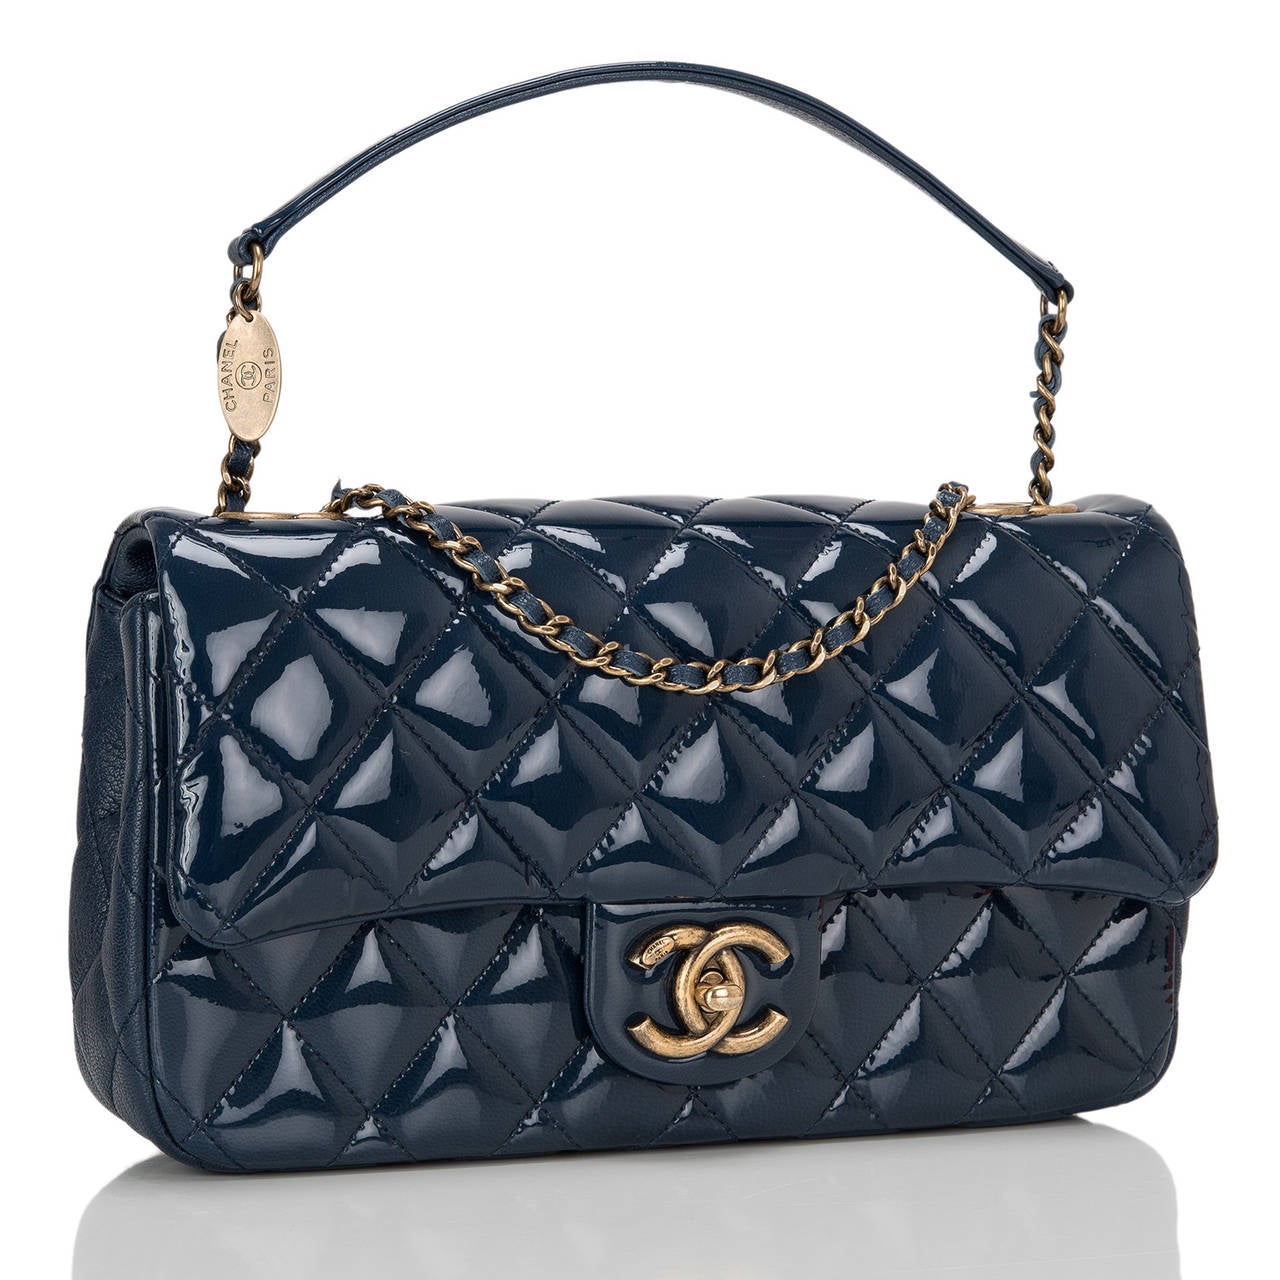 This gorgeous Chanel Navy Quilted Patent Eyelet Flap bag with antiqued gold tone hardware and features a front flap with the signature CC closure, quilted goat skin gussets, half moon back pocket, and an adjustable antiqued gold tone chain link and